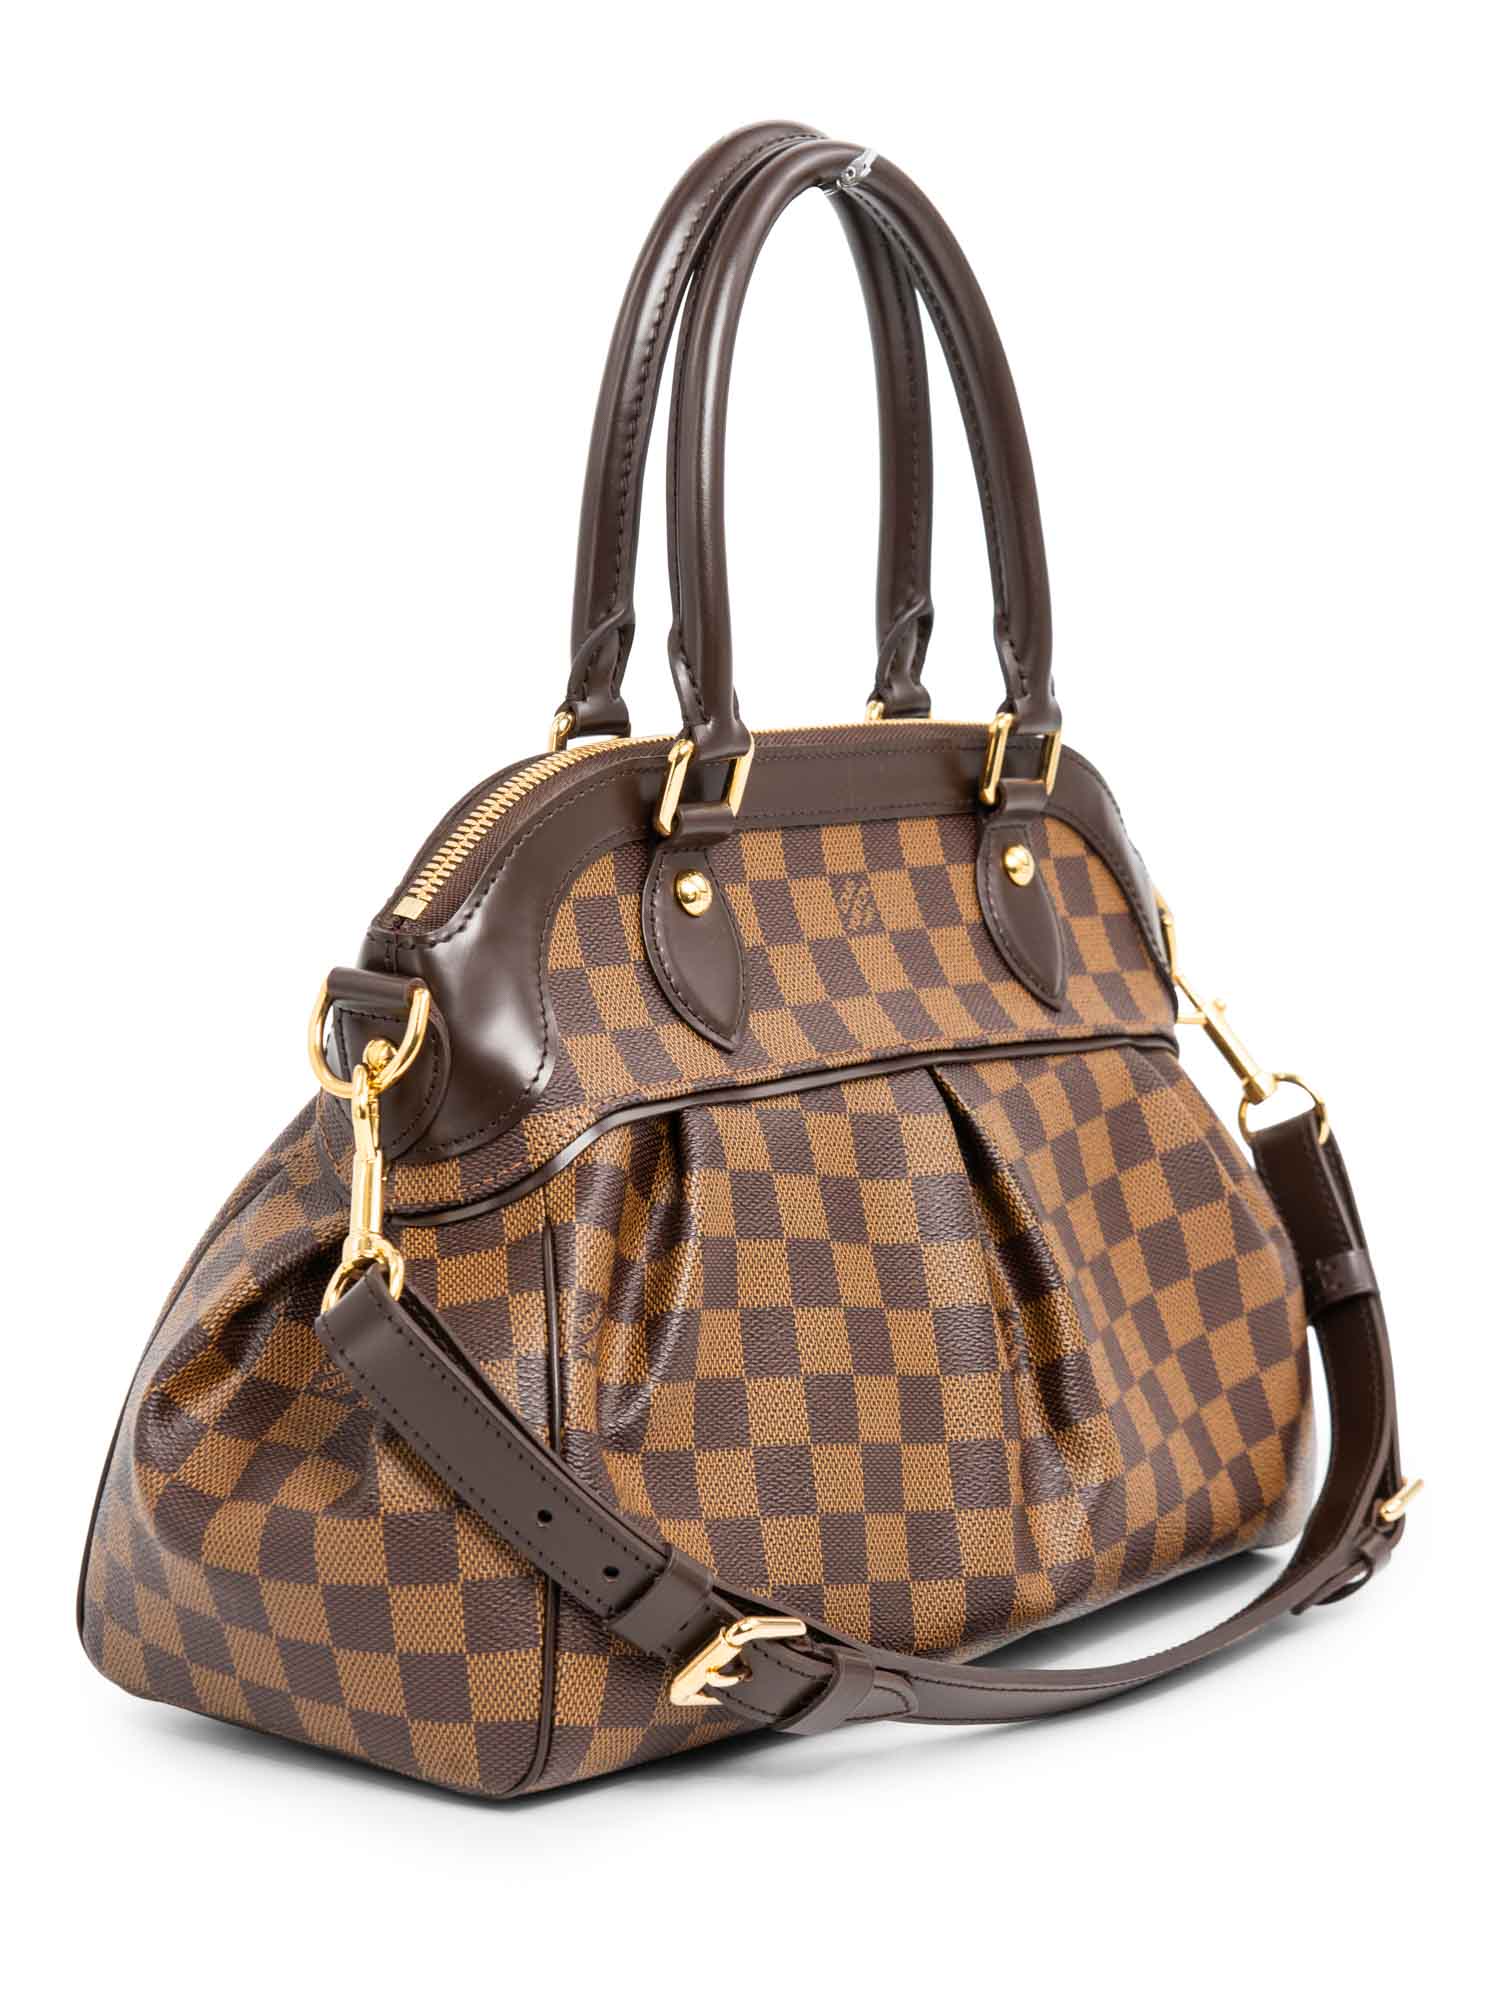 gm neverfull size